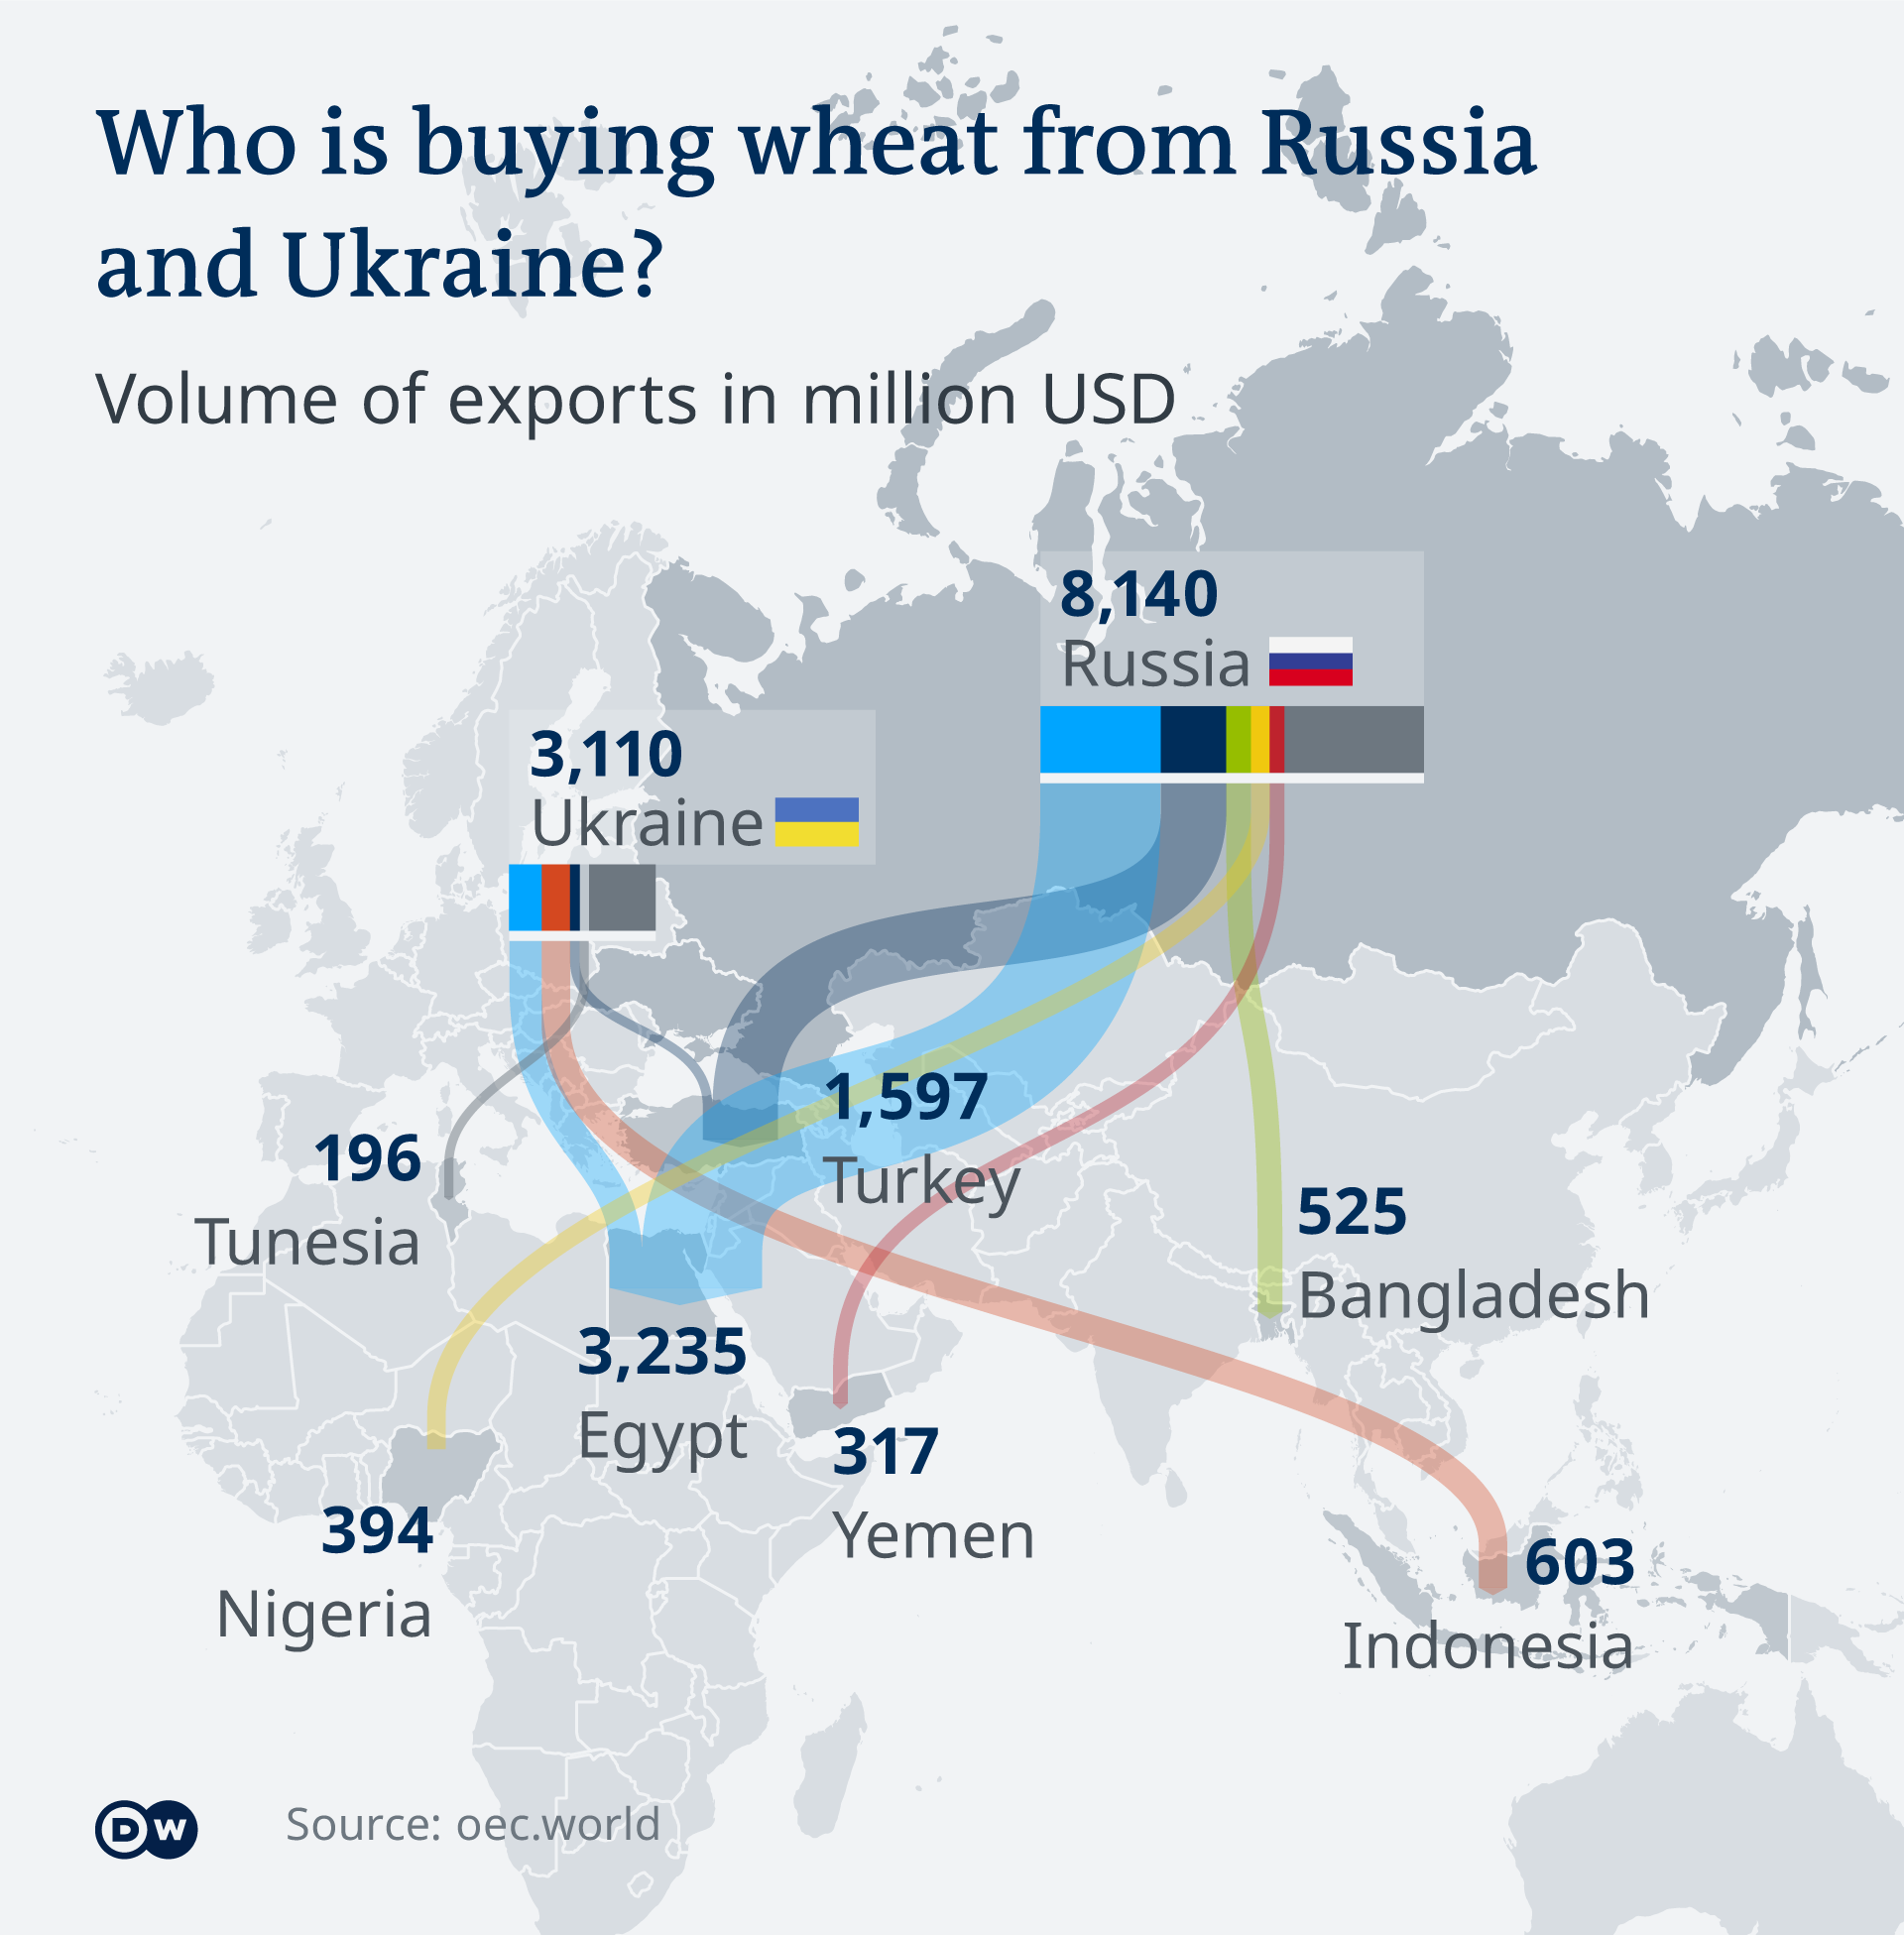 An infographic showing major buyers of Russian and Ukrainian wheat